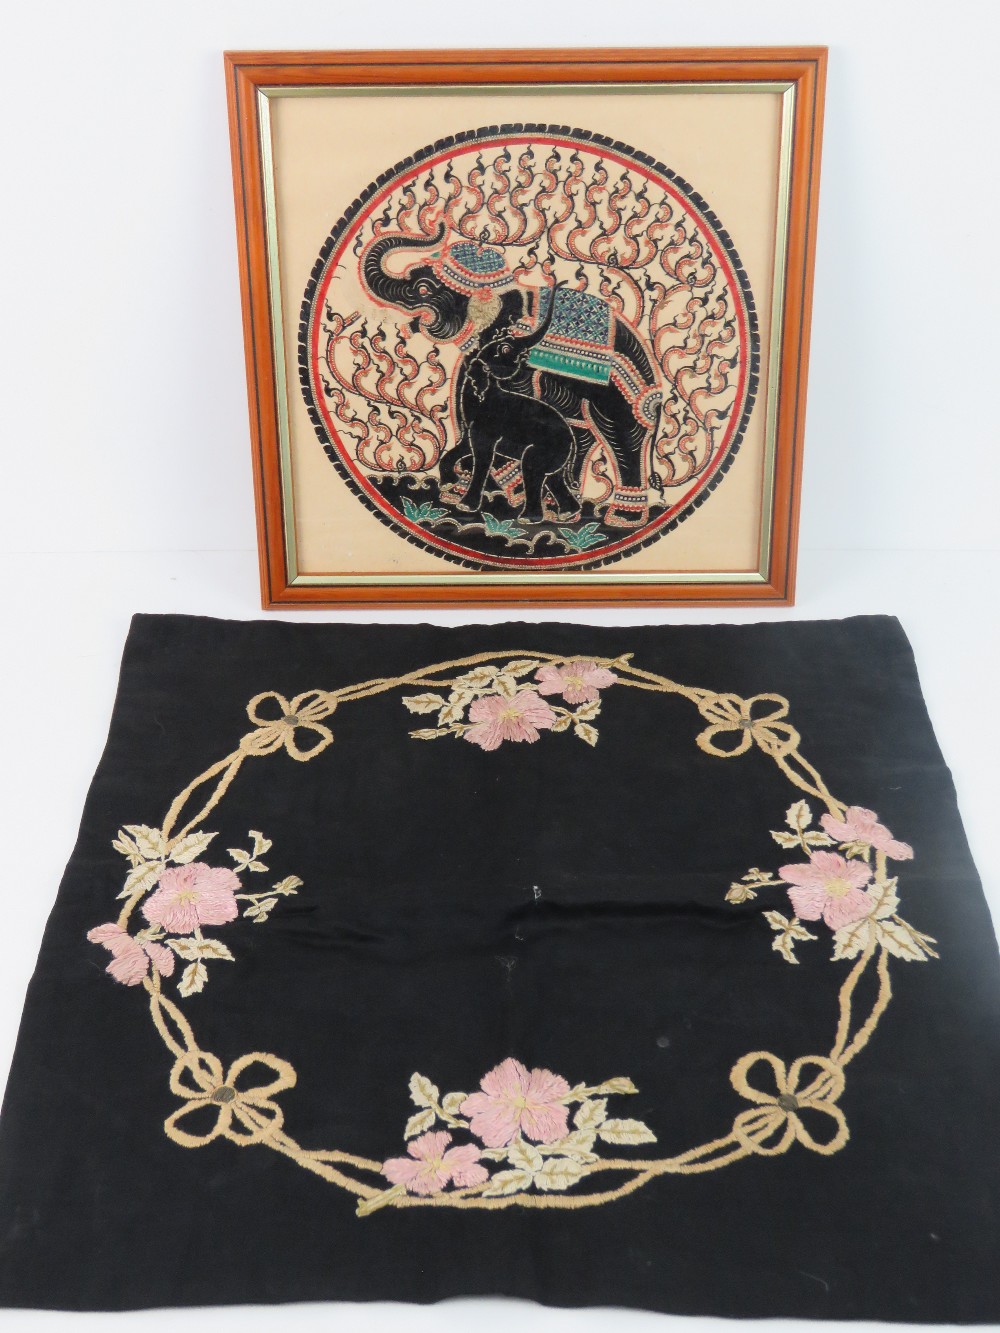 A framed Indo Asian pierced and part gilded decorative textile piece, 28cm dia, in frame.